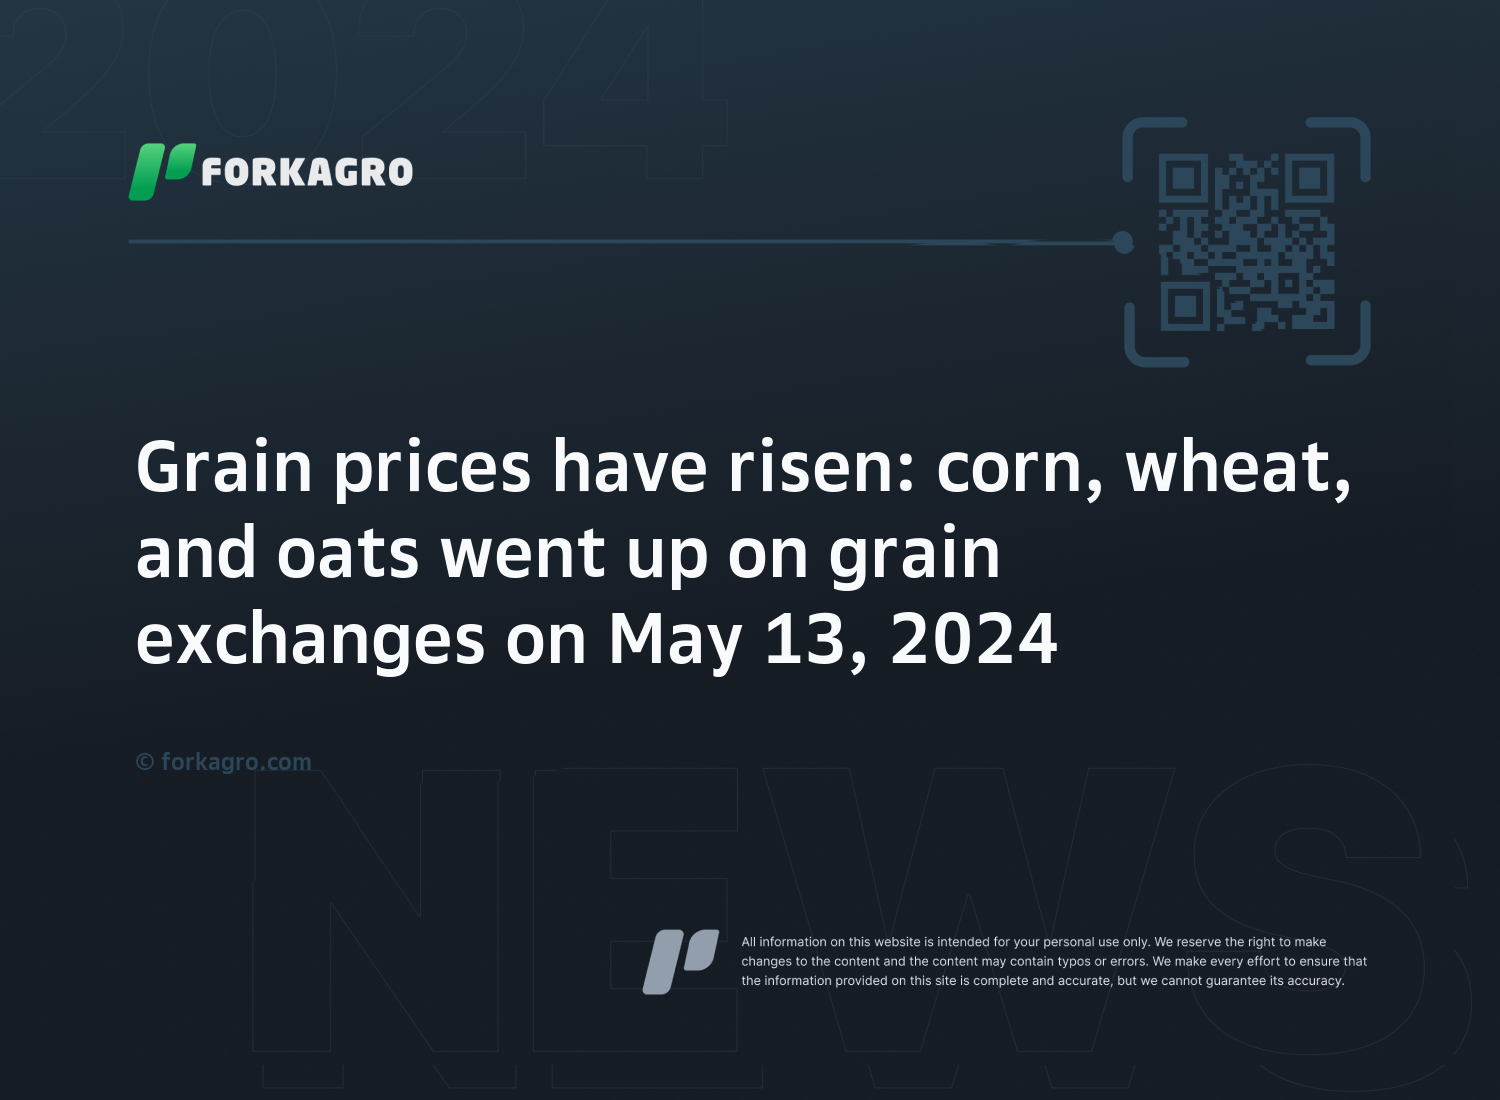 Grain prices have risen: corn, wheat, and oats went up on grain exchanges on May 13, 2024